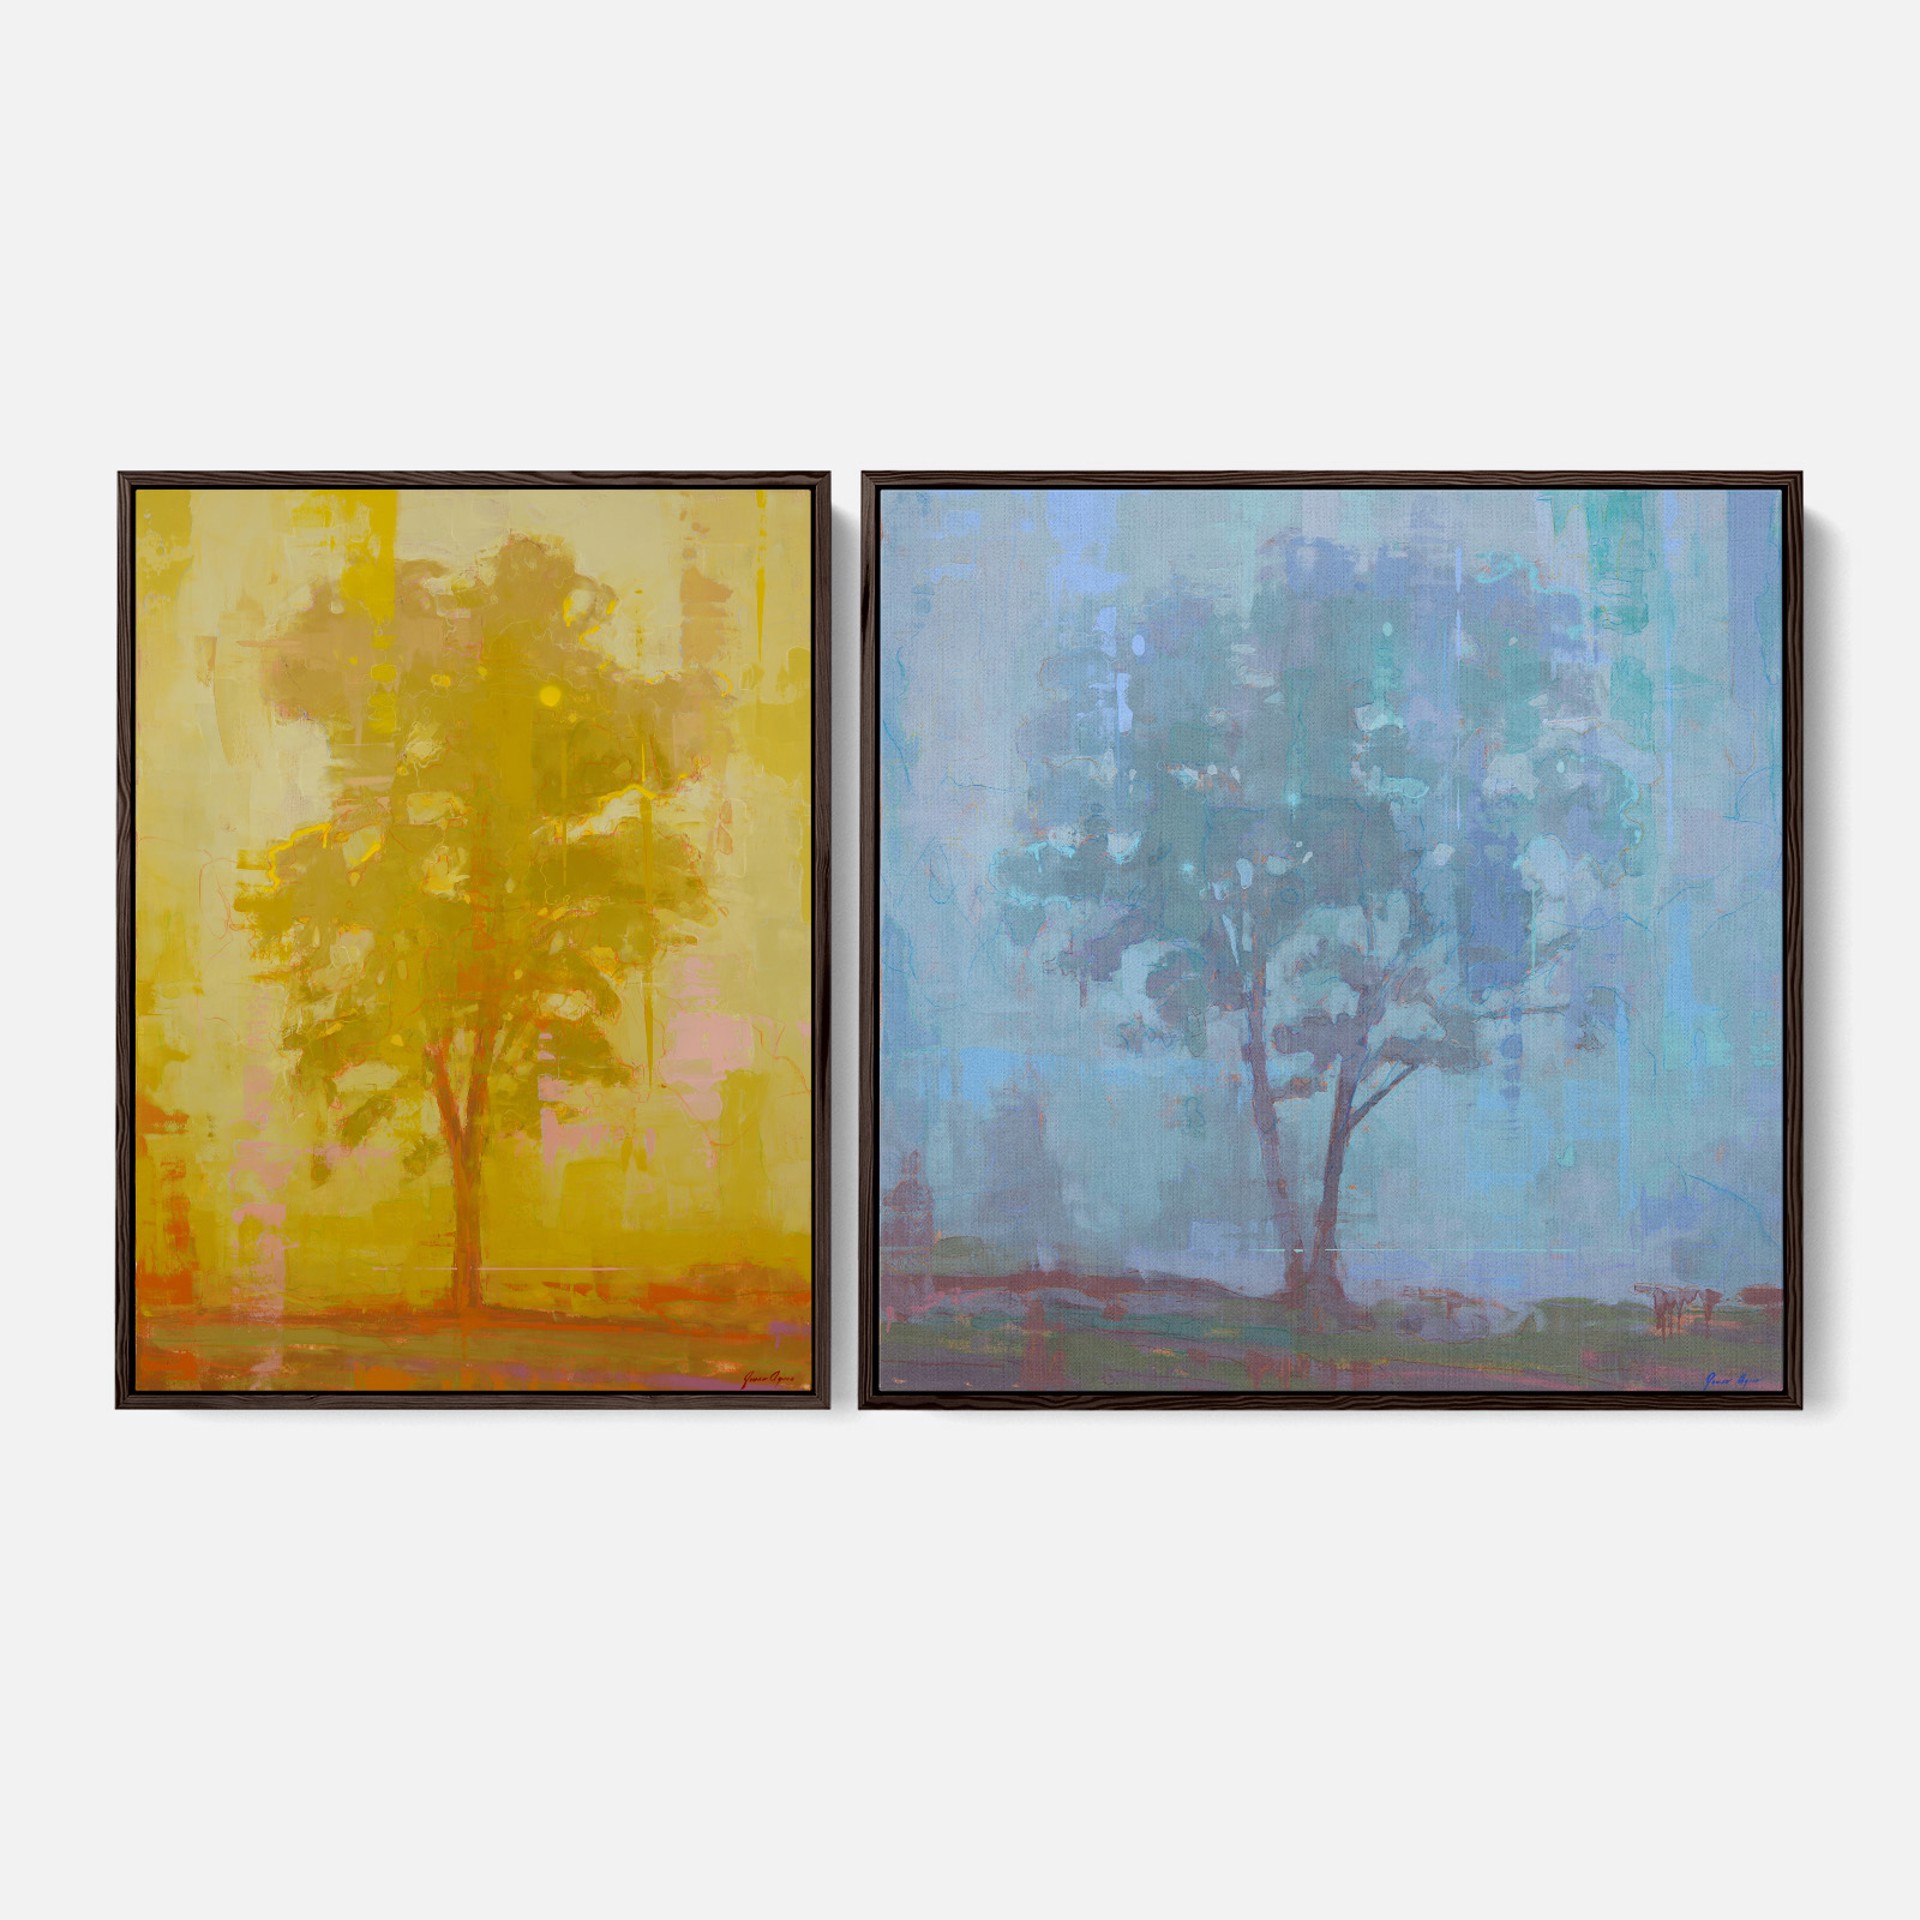 Harmony and Contrast Diptych (can be sold separately) by James Ayers